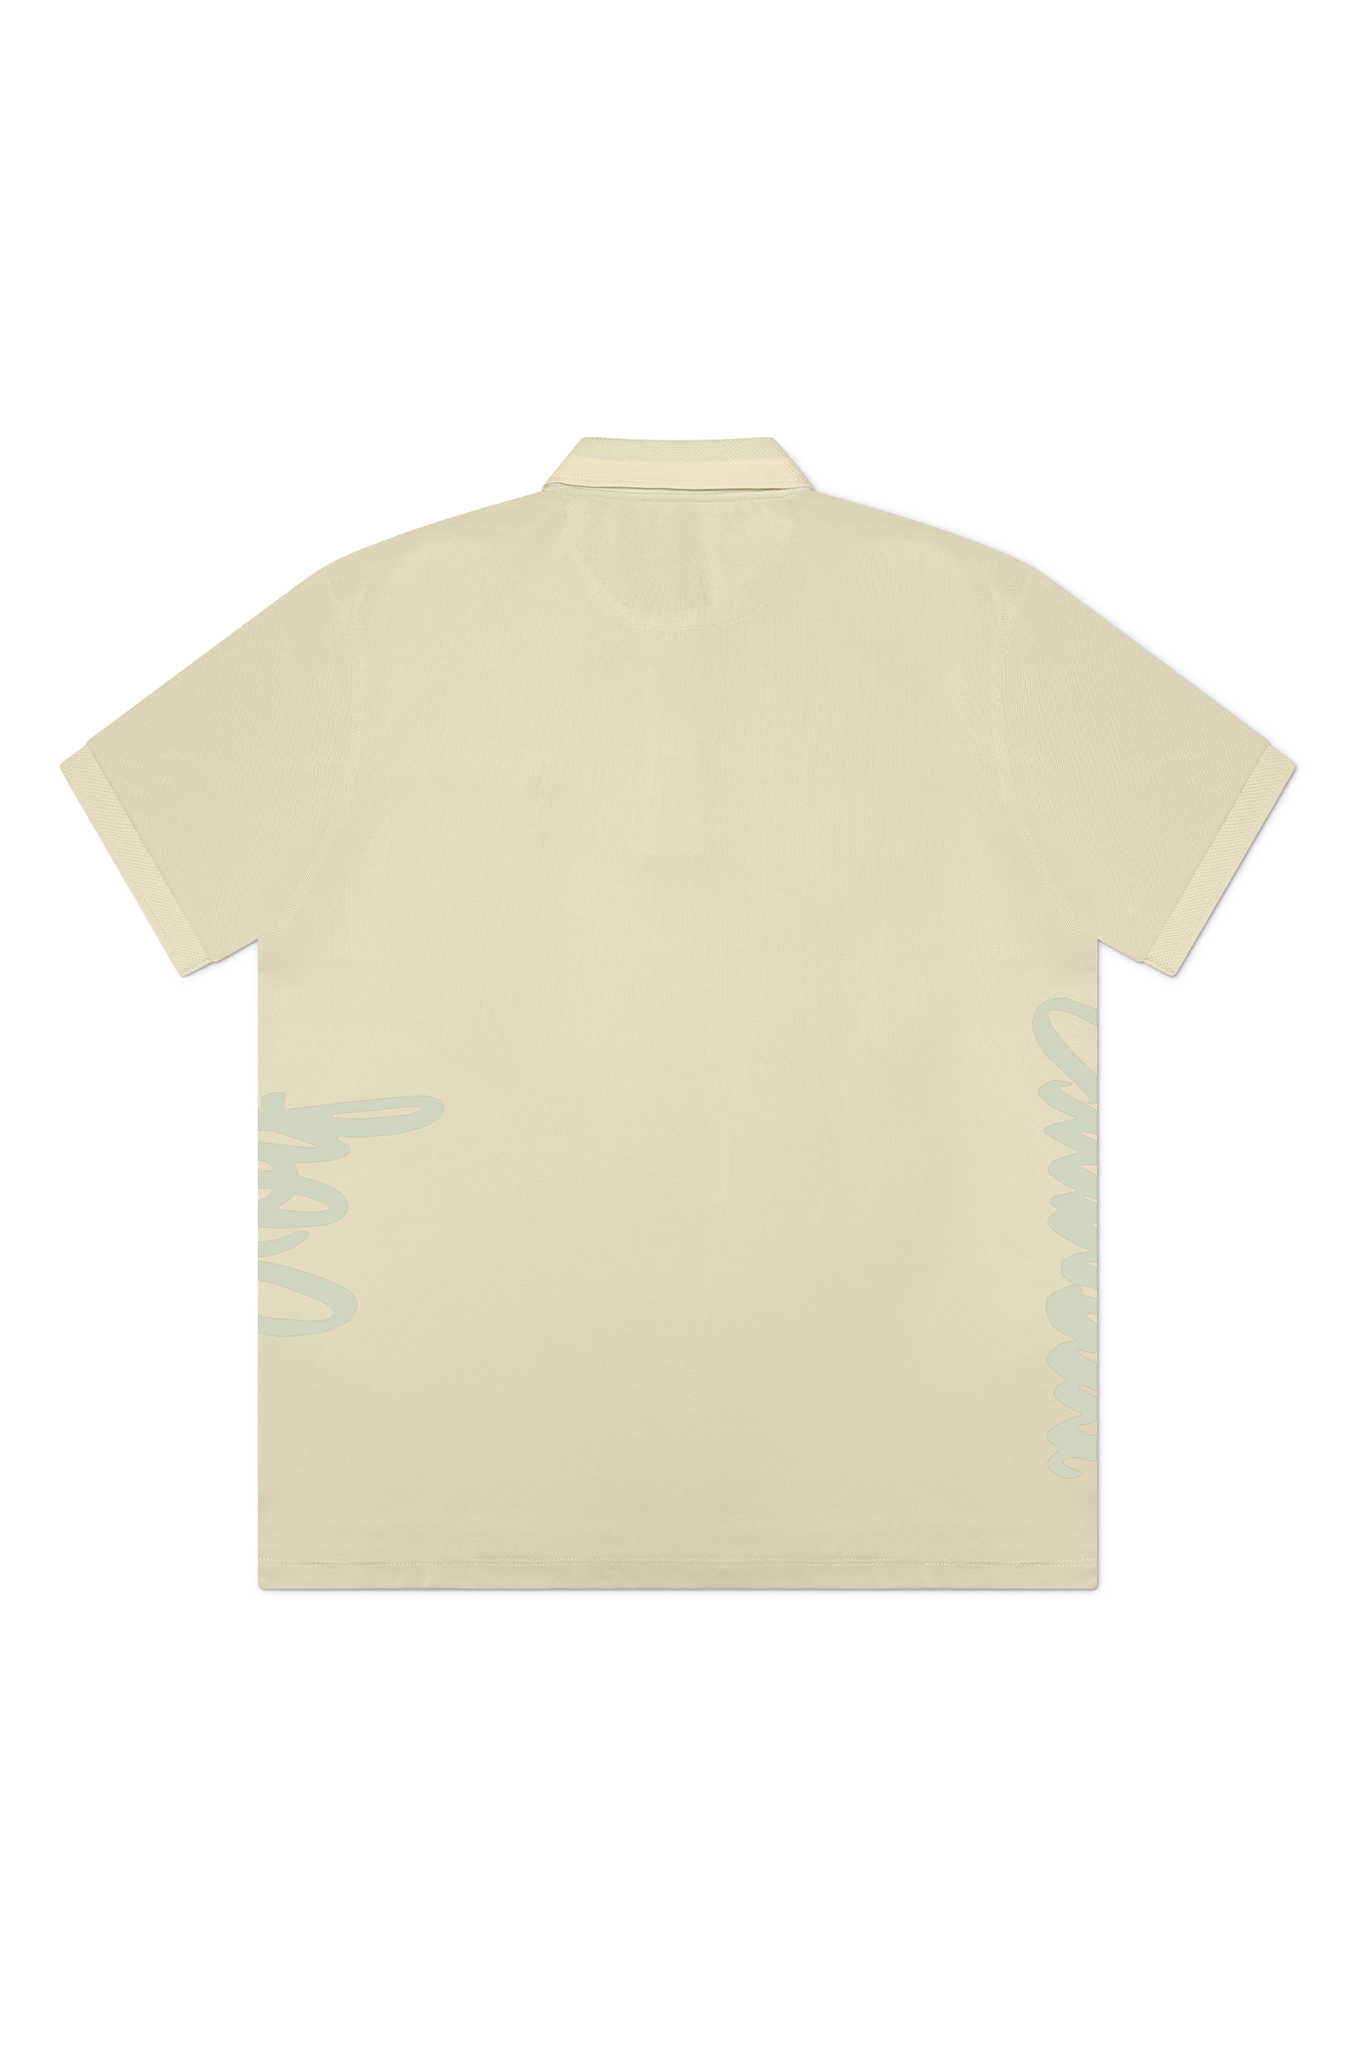 Frosted Almond Eastside Golf Follow Through Polo Shirt